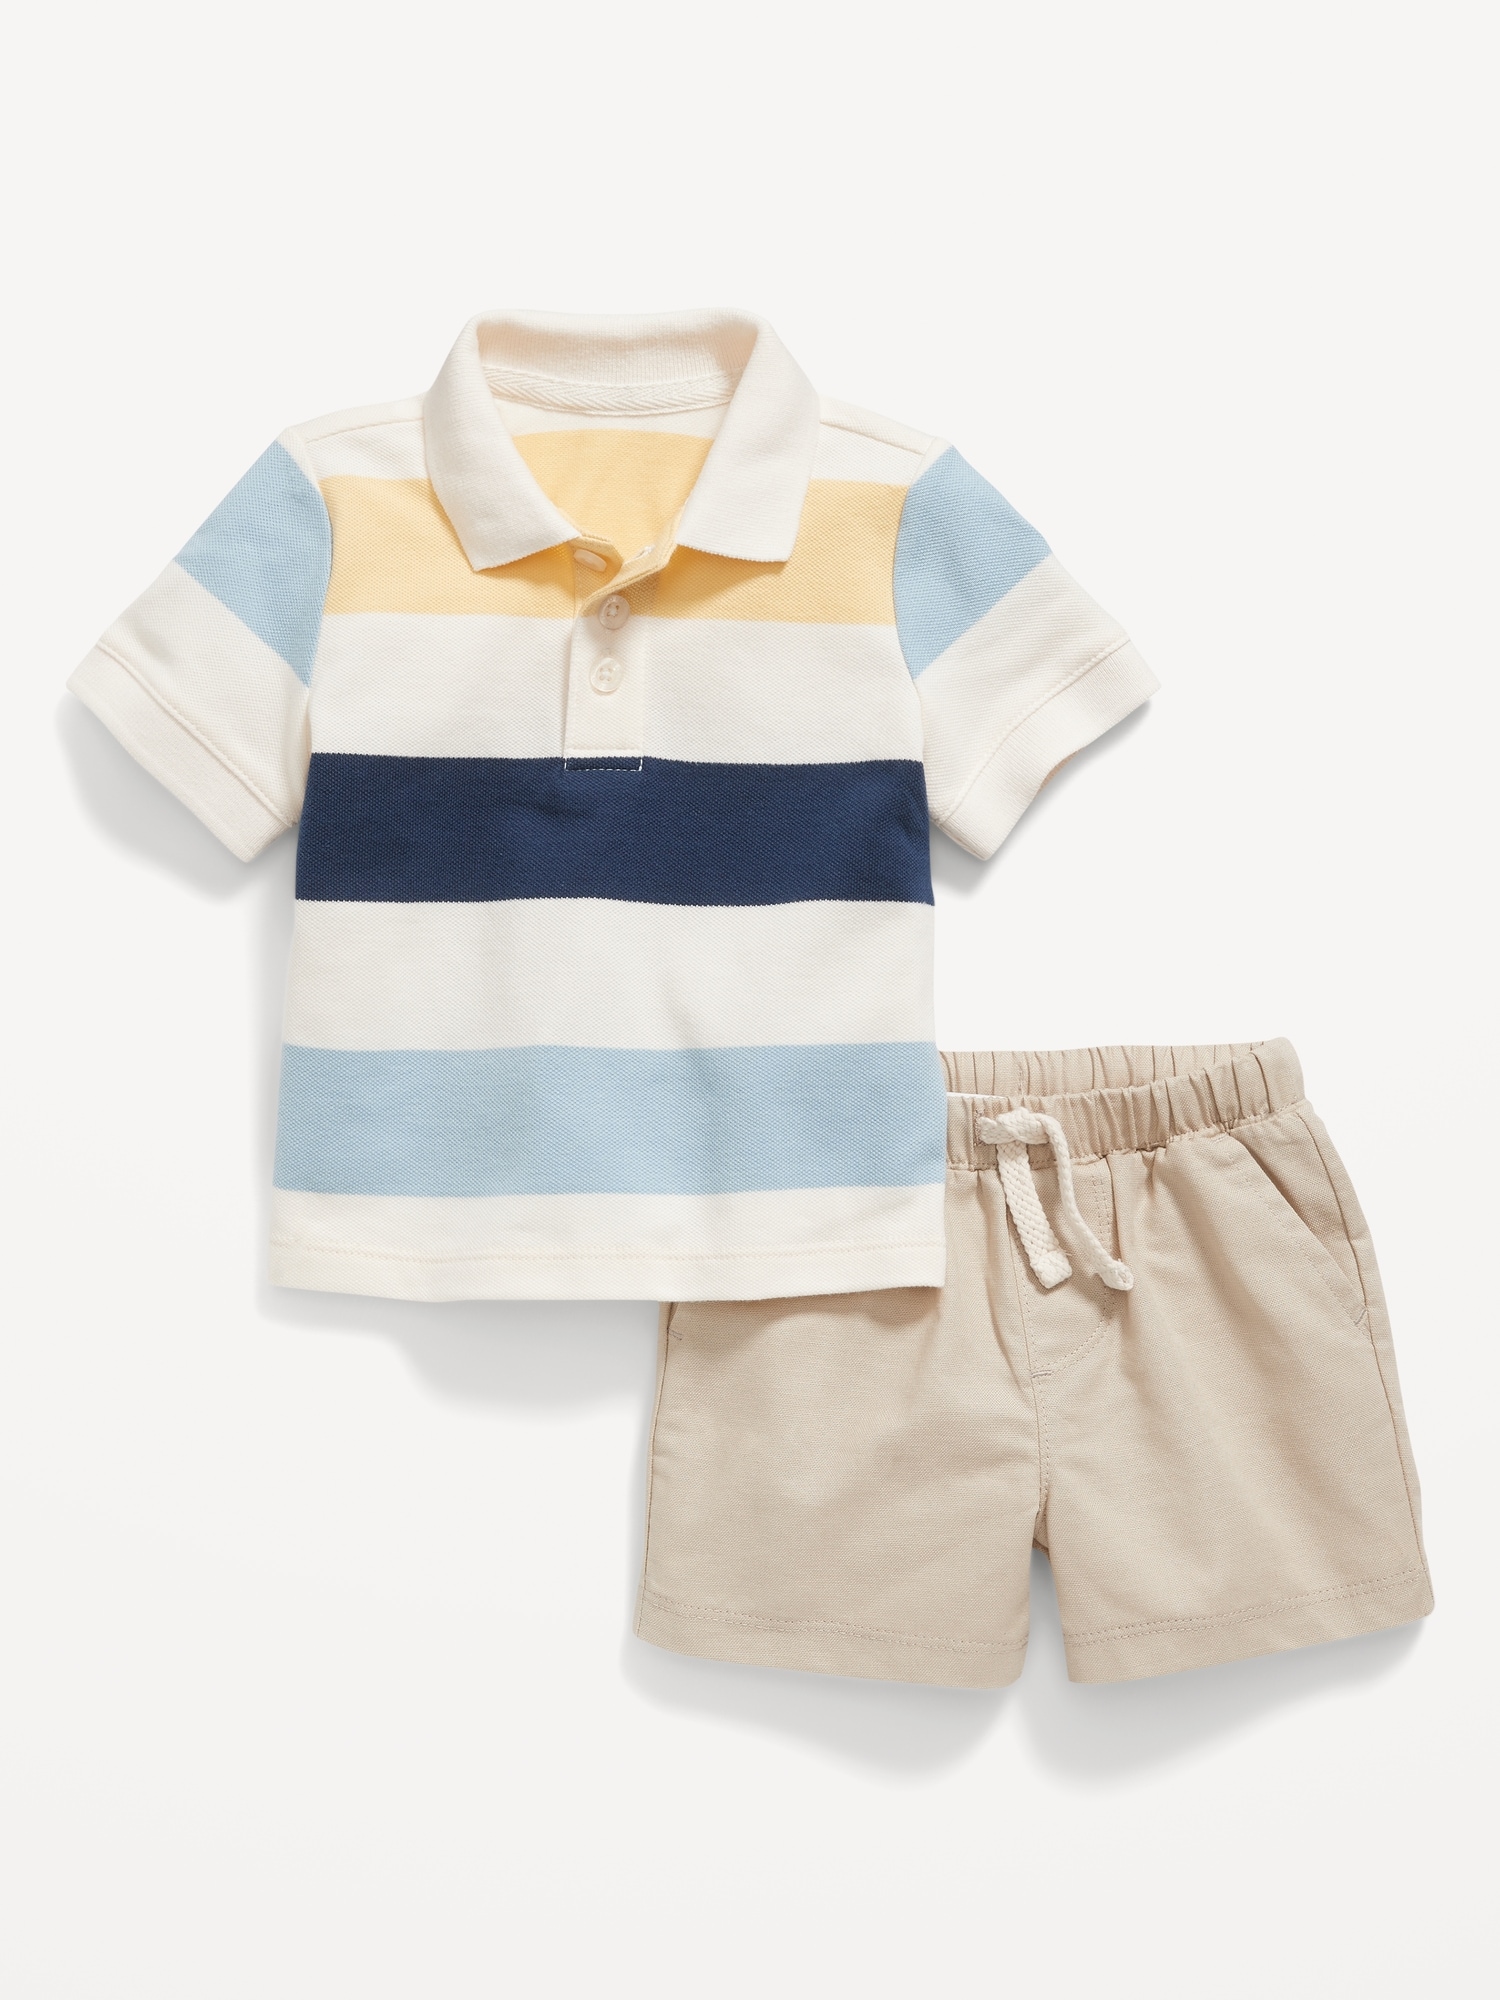 Striped Polo Shirt and Shorts Set for Baby | Old Navy